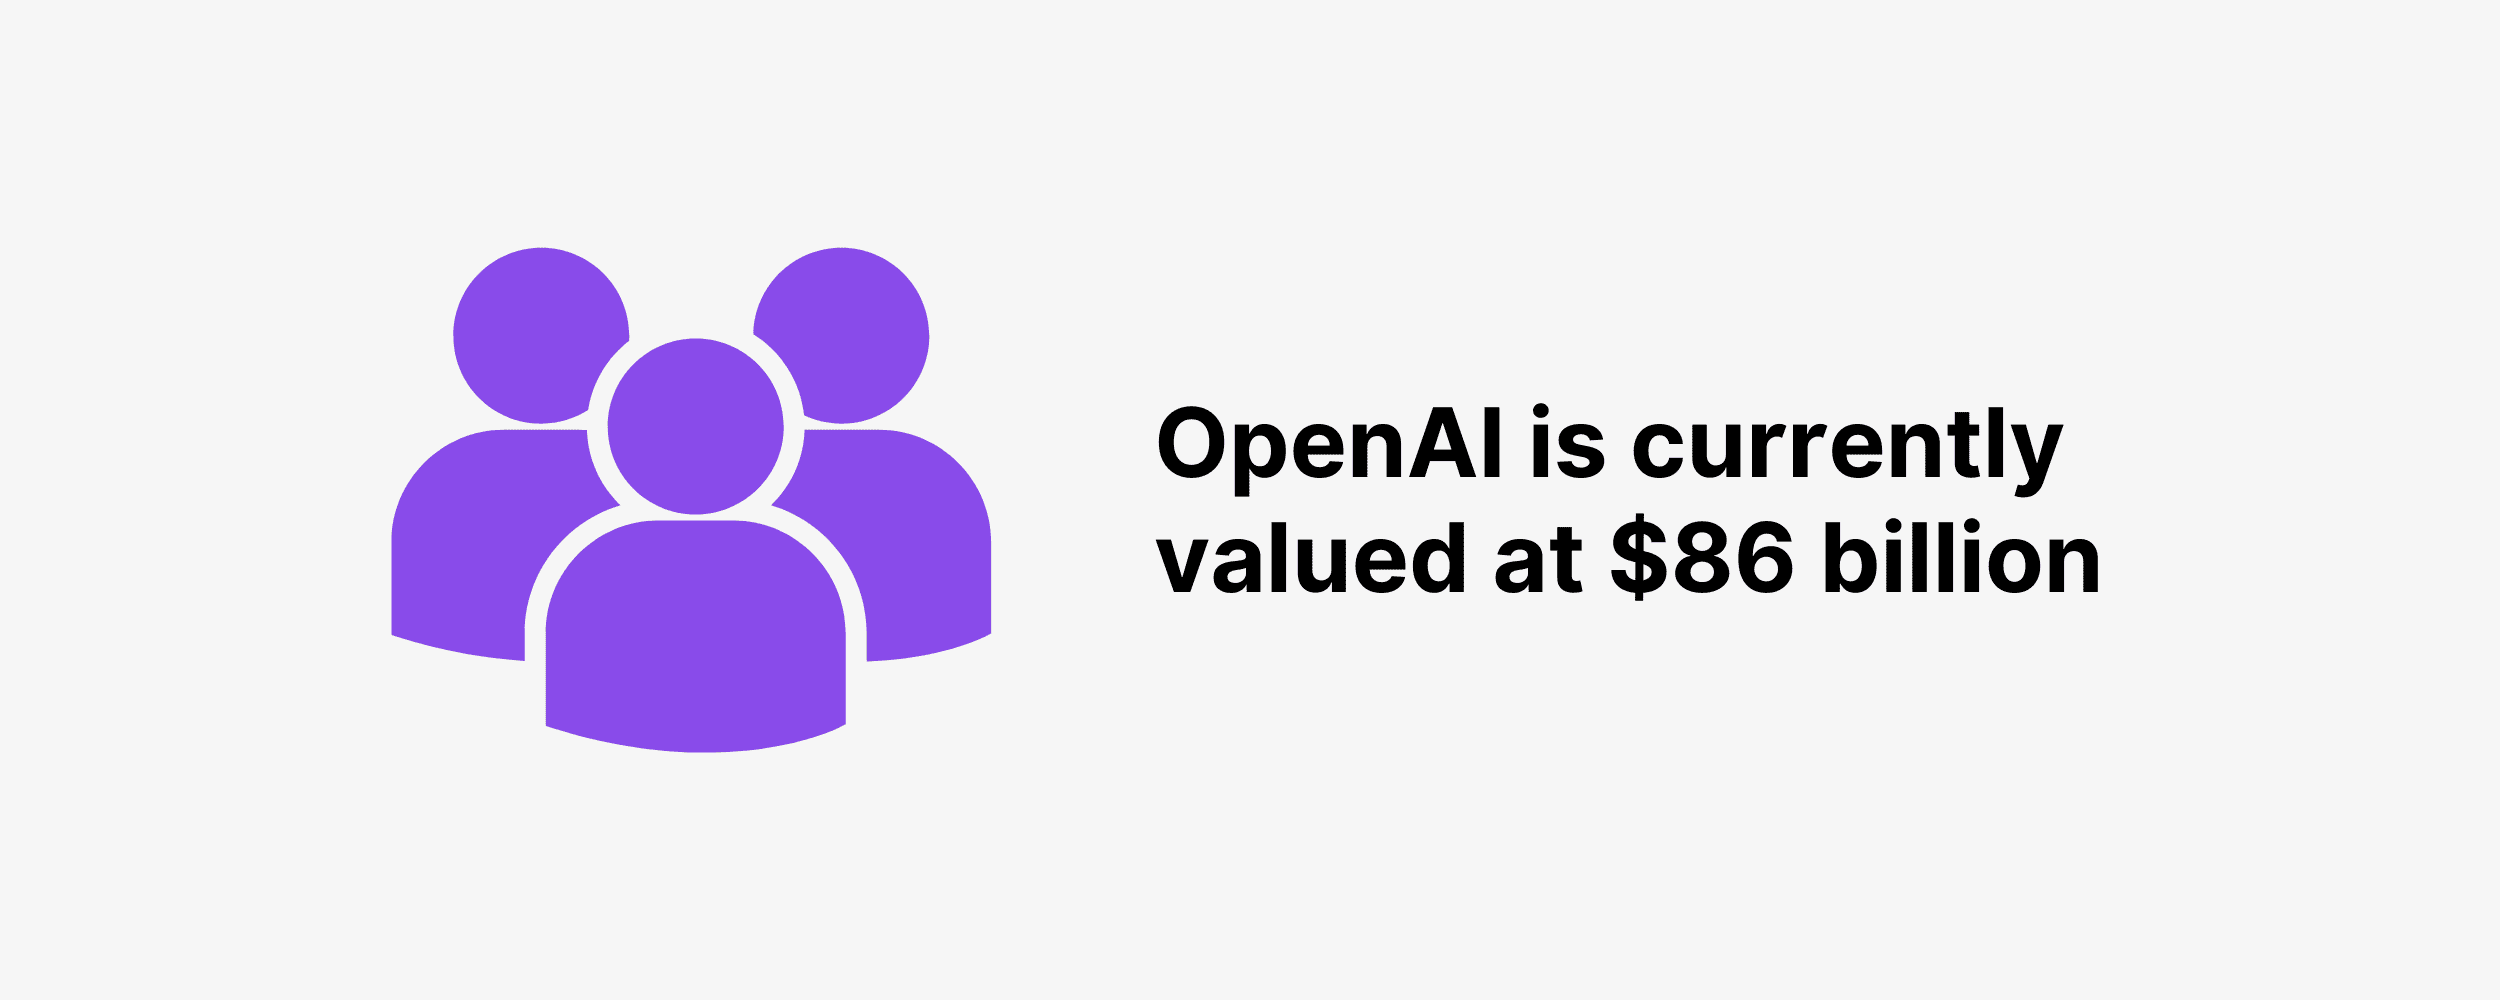 OpenAI is currently valued at $86 billion